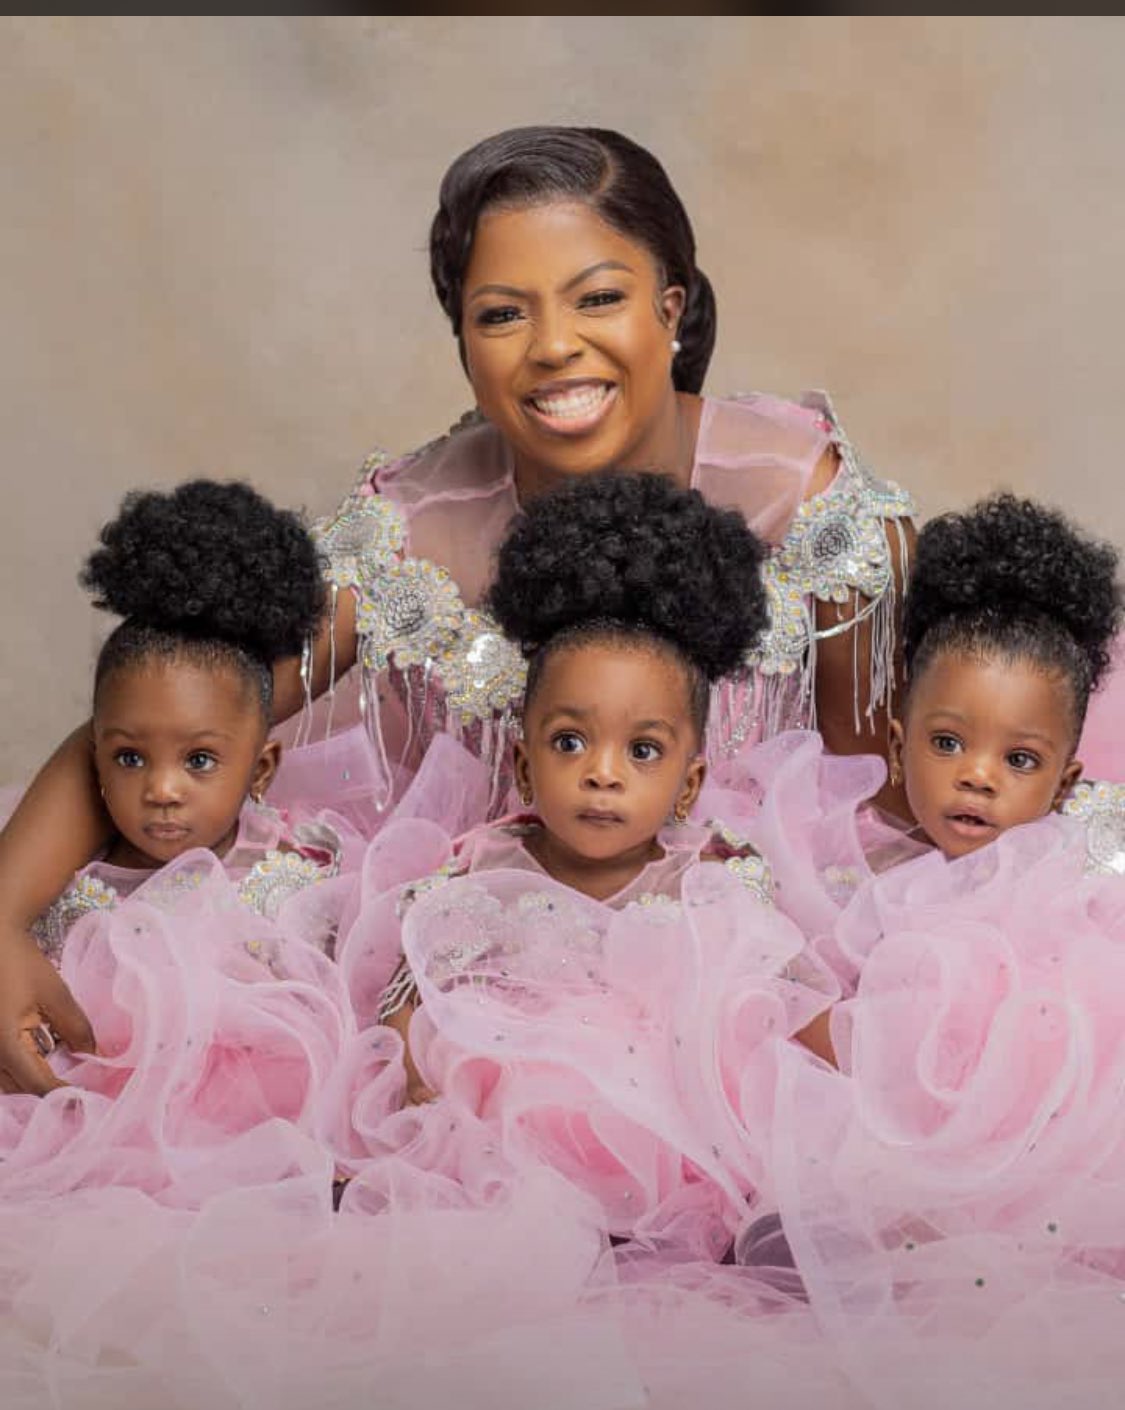 Lady celebrates birthday of aunt's triplets whom she welcomed after years - woman triplets